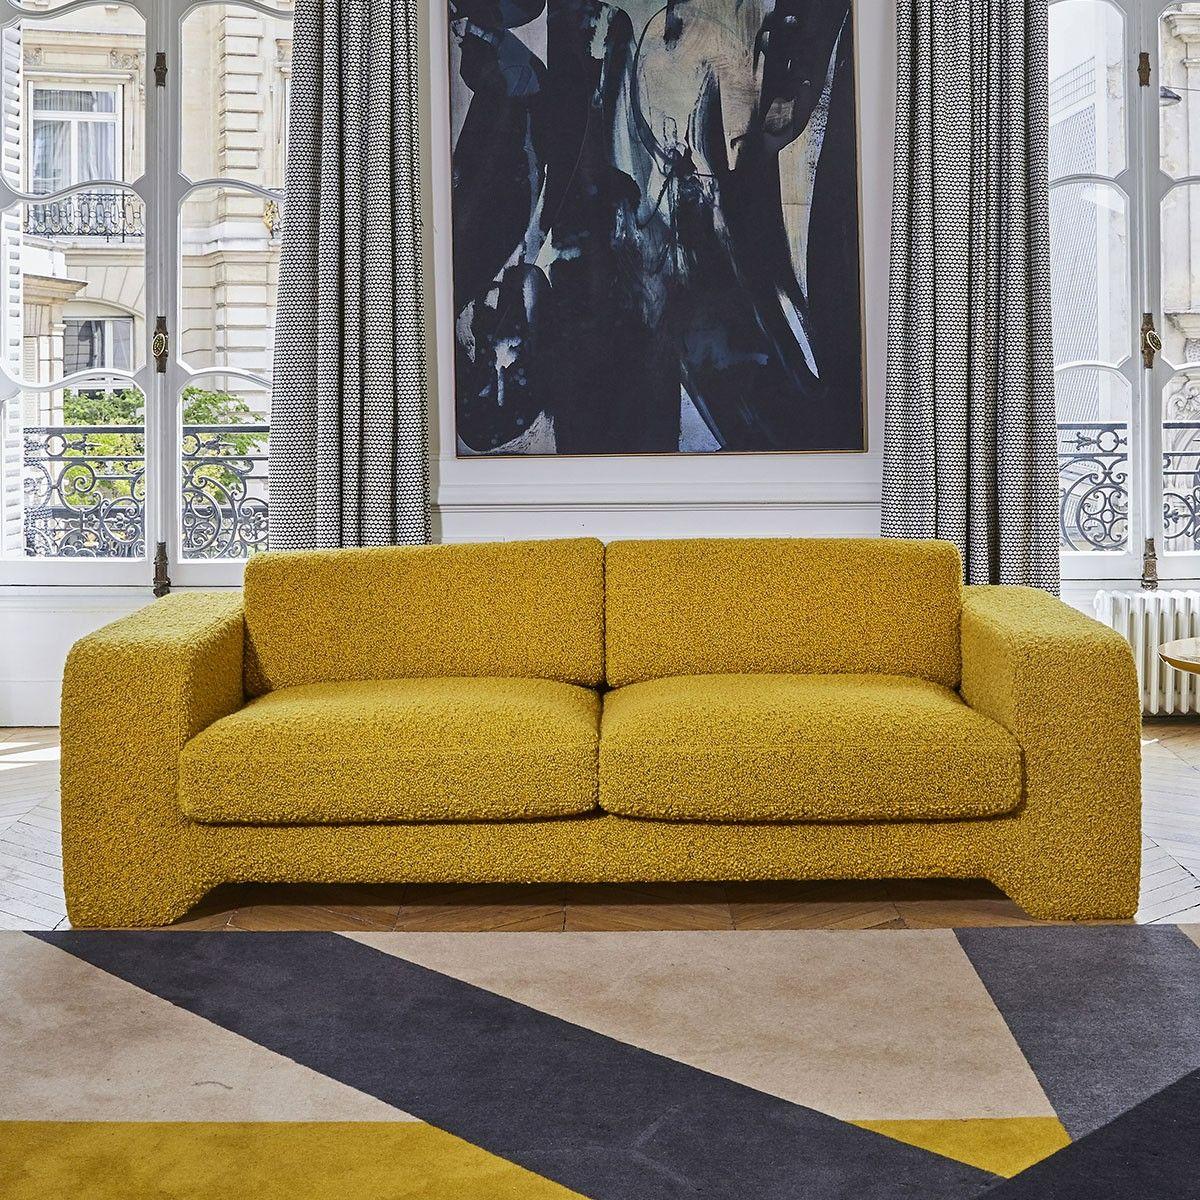 Popus Editions Giovanna 3 Seater Sofa in Ciotello Athena Loop Yarn Upholstery In New Condition For Sale In Paris, FR